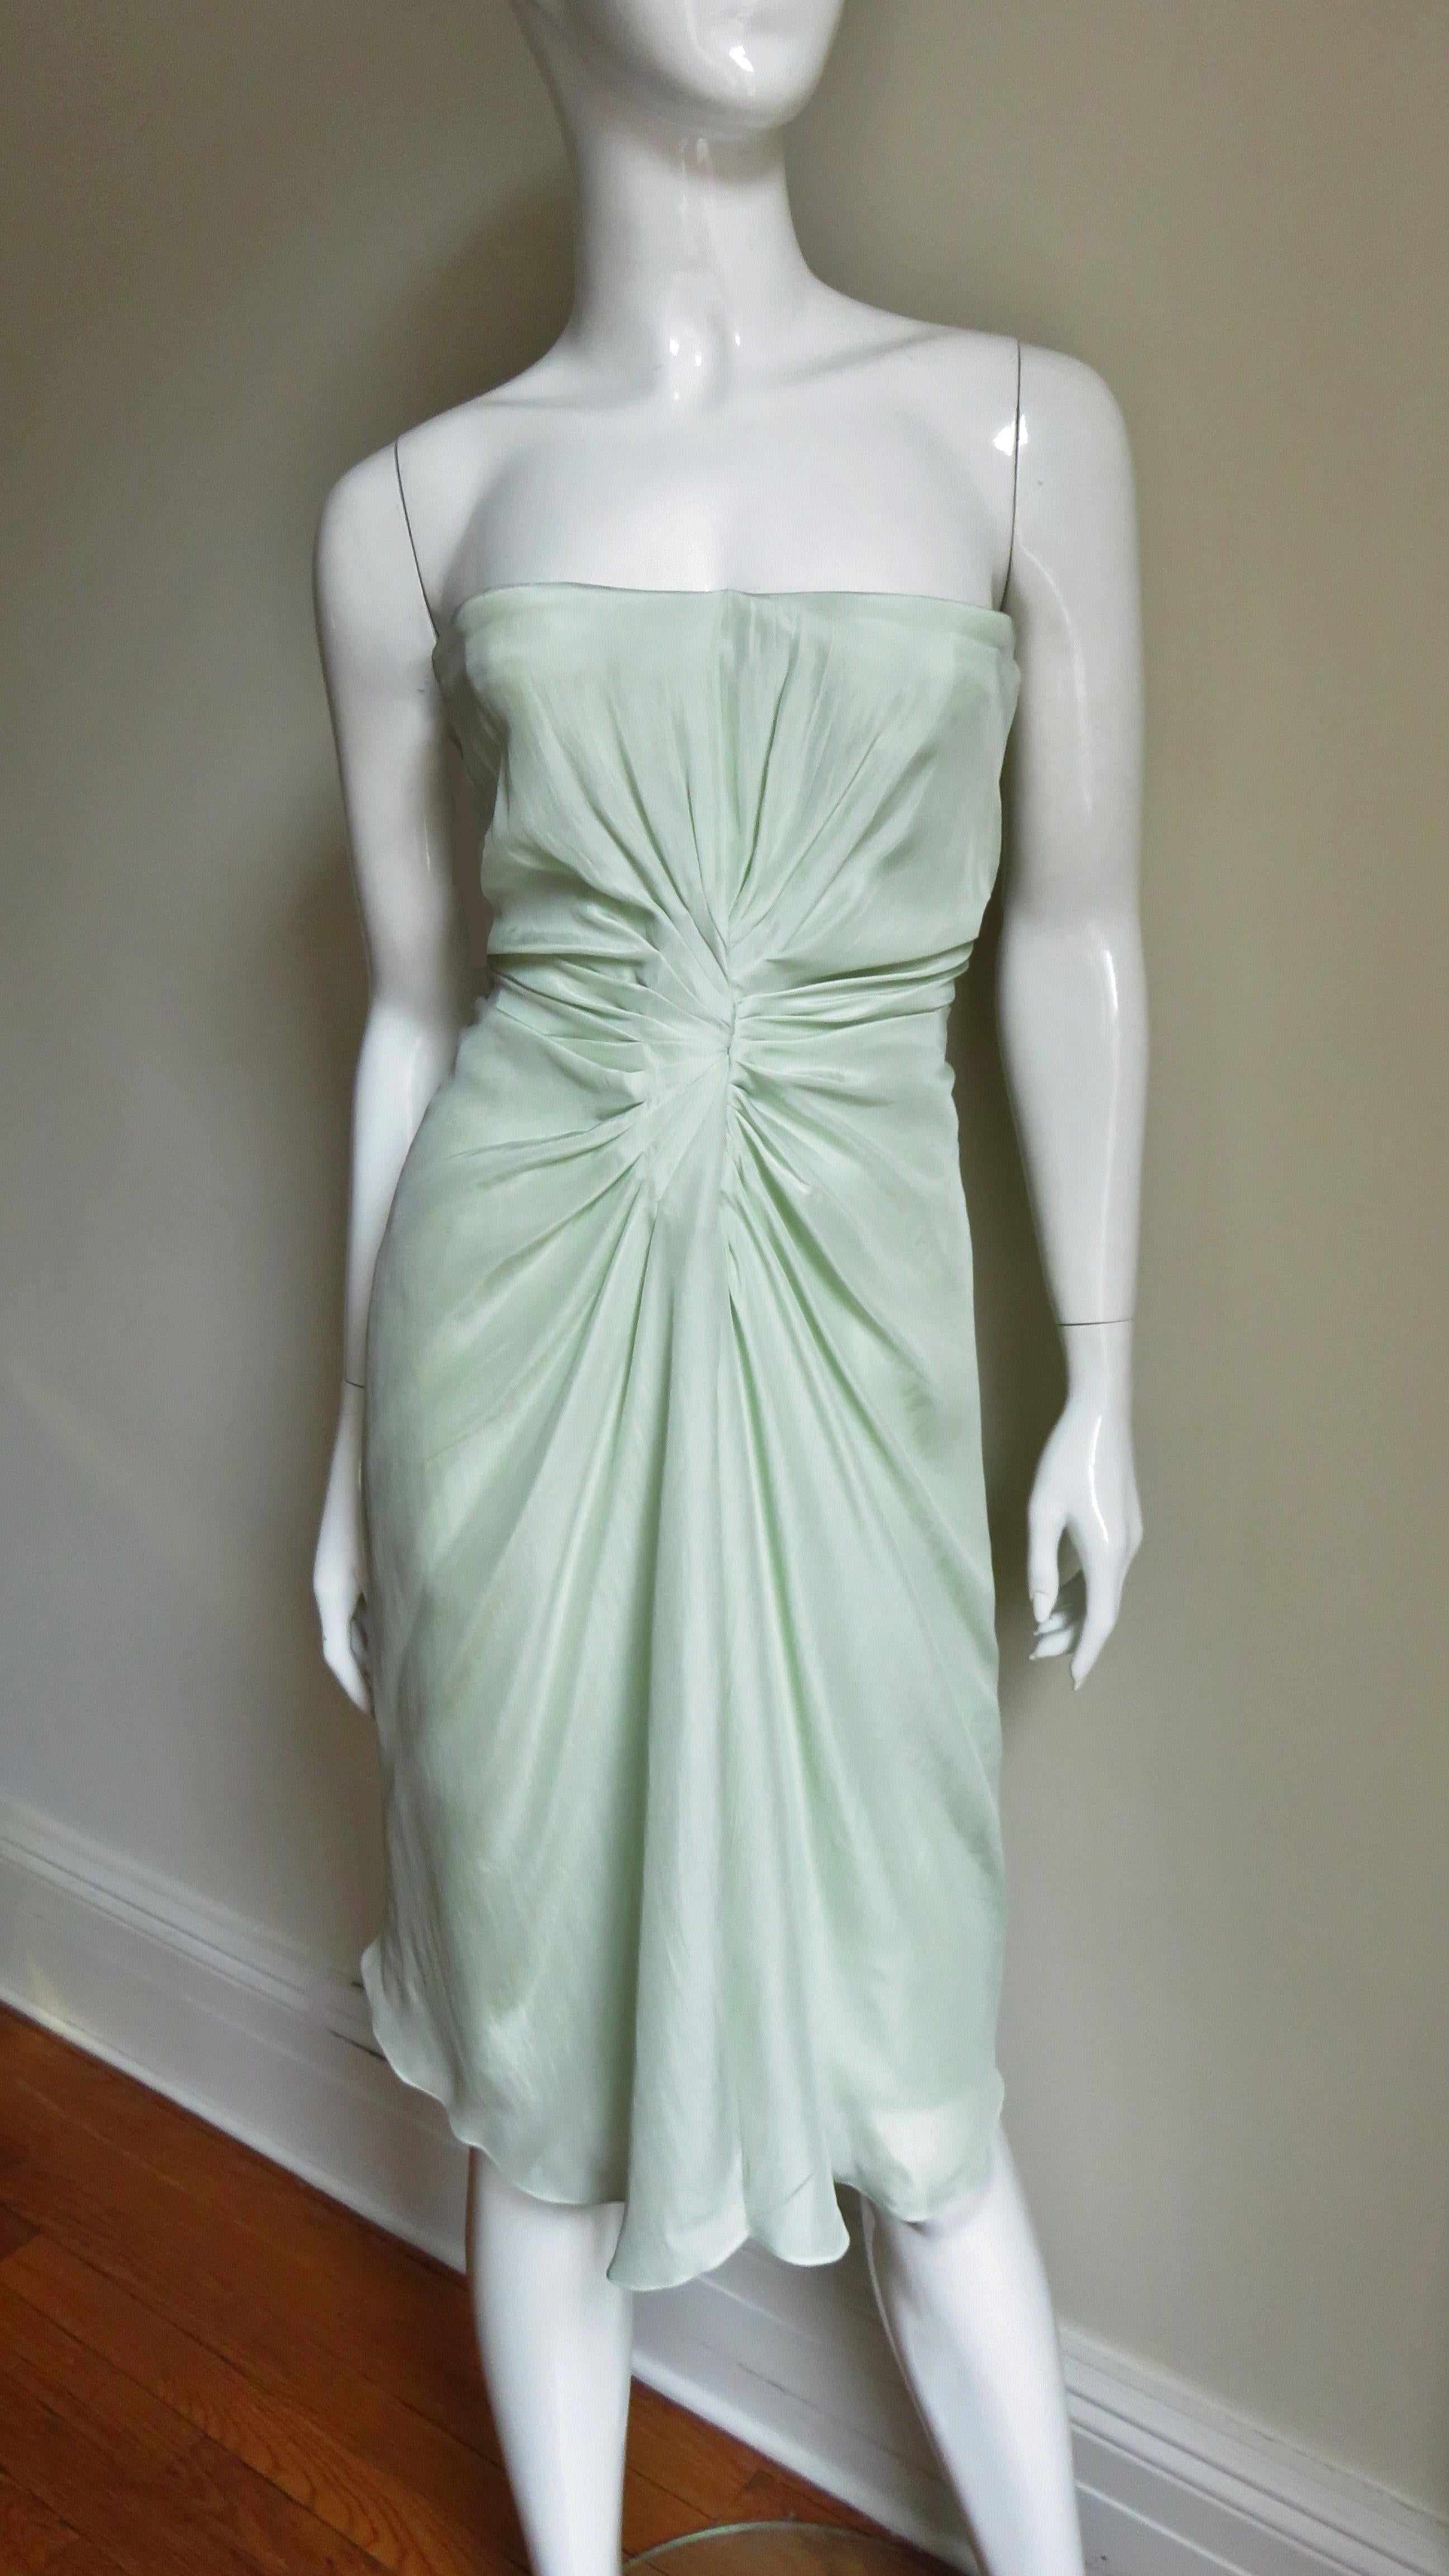 A gorgeous light mint green silk dress by john Galliano for Christian Dior. It has an underwire inner boned corset with detachable adjustable straps so it can be worn strapless if desired.  Very flattering with an array of seaming and tucks on each